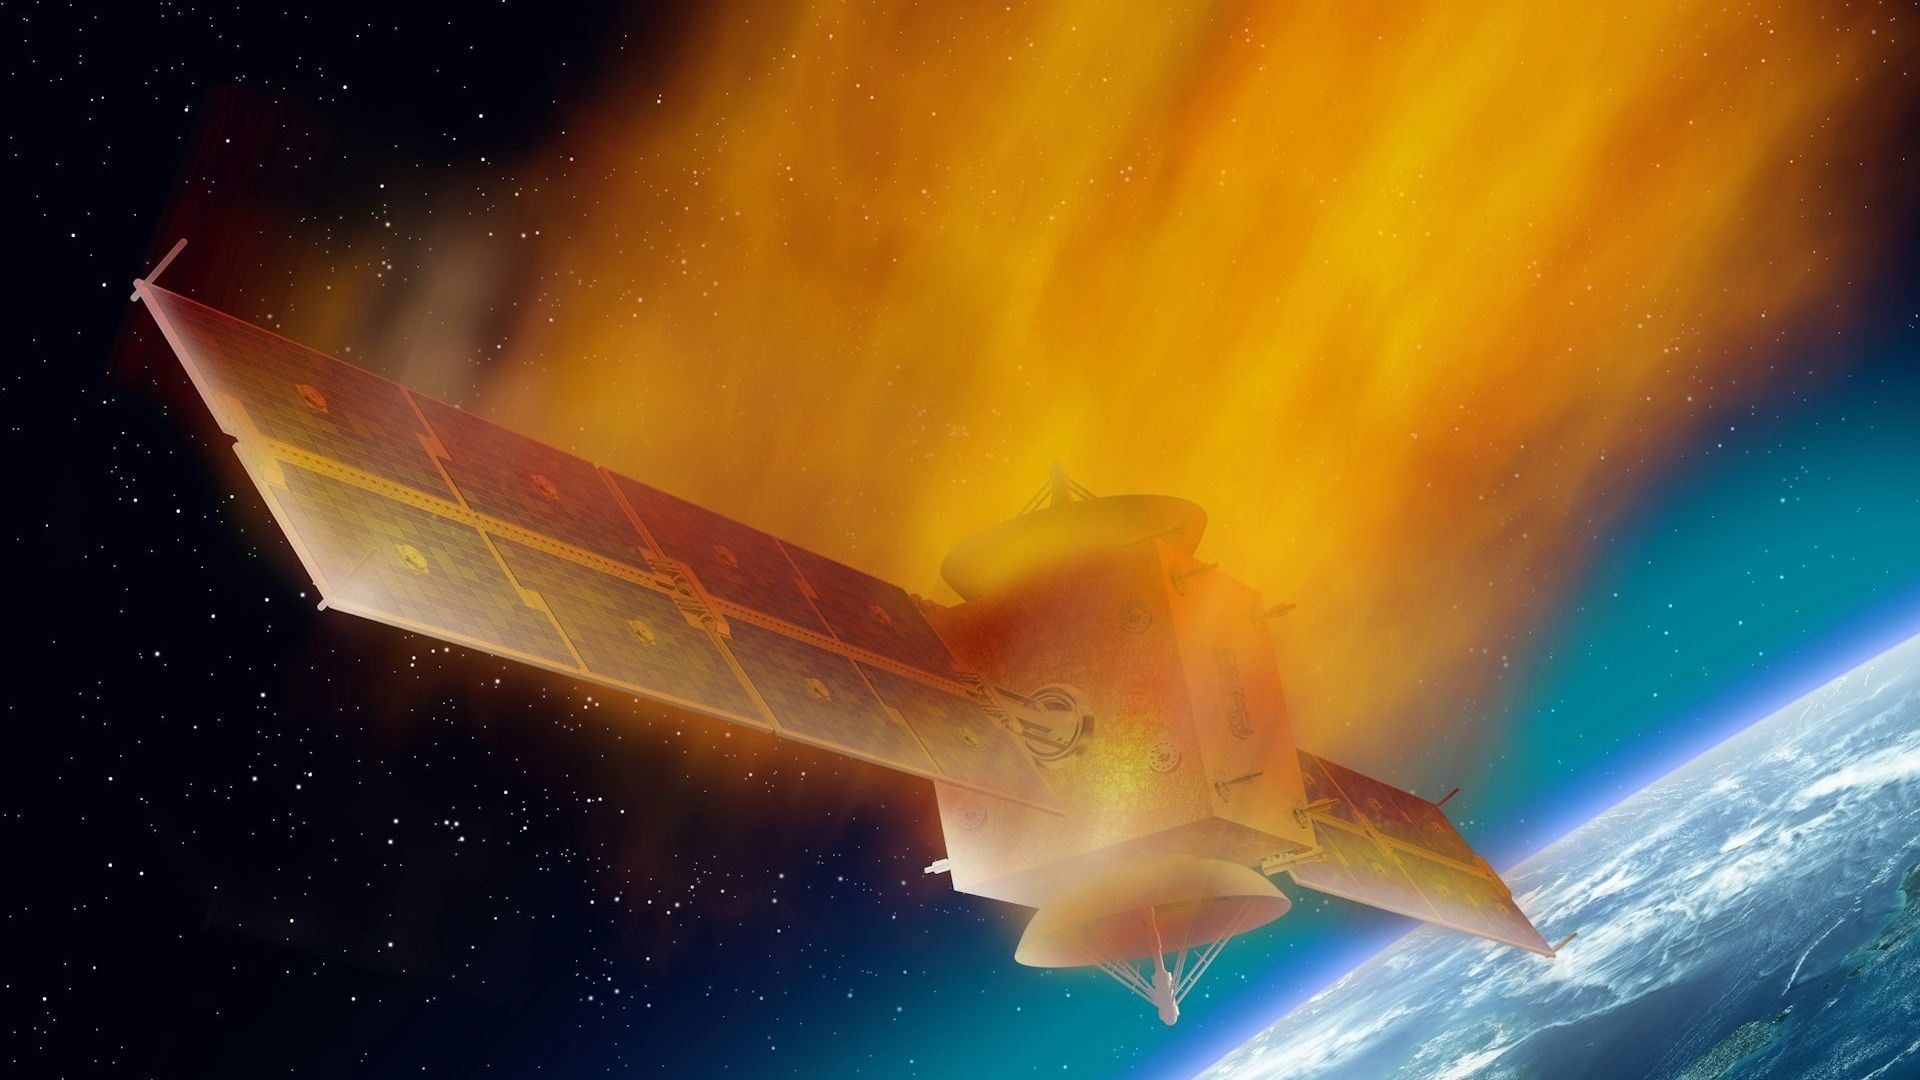 Satellites are burning up in the upper atmosphere – and we still don’t know what impact this will have on the Earth’s climate Space